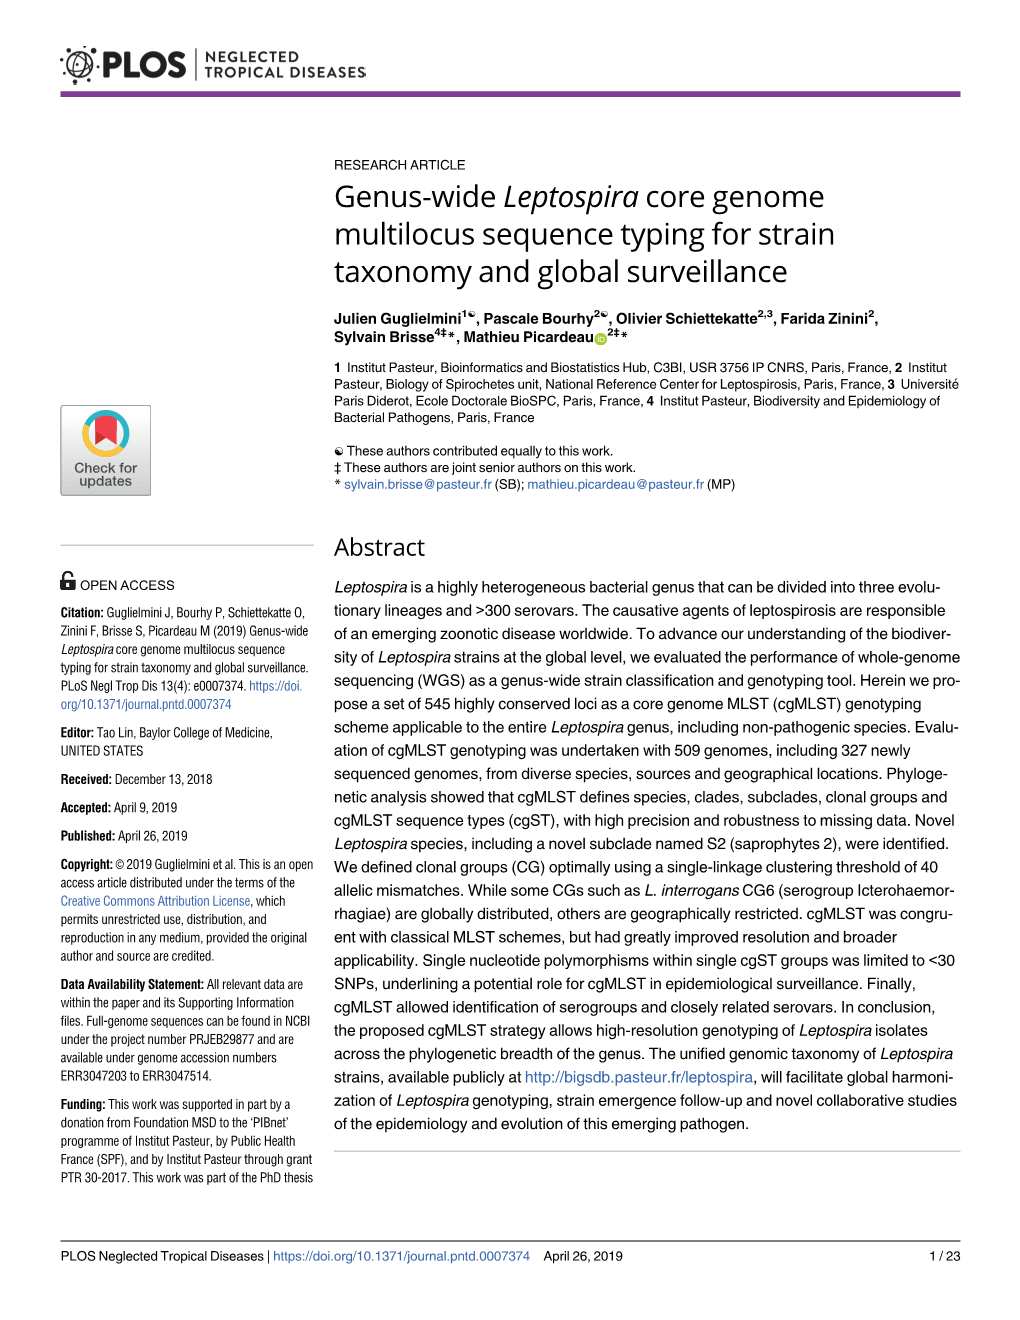 Genus-Wide Leptospira Core Genome Multilocus Sequence Typing for Strain Taxonomy and Global Surveillance